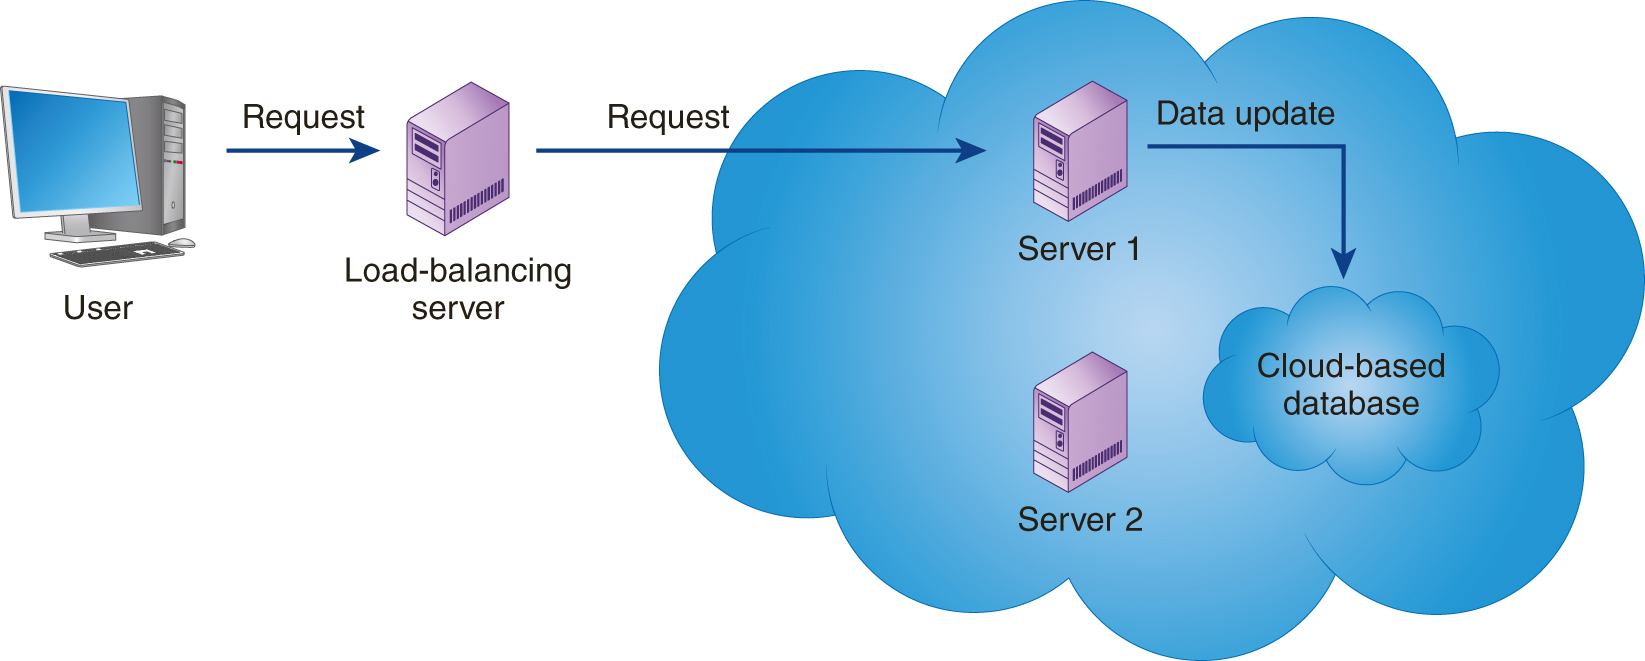 A system representing a user sends a request to a load balancing server, which in turn directs the request to server 1 placed in a larger cloud. Data update is directed from server 1 to cloud based database in the same cloud. Server 2 is also shown in the larger cloud.
